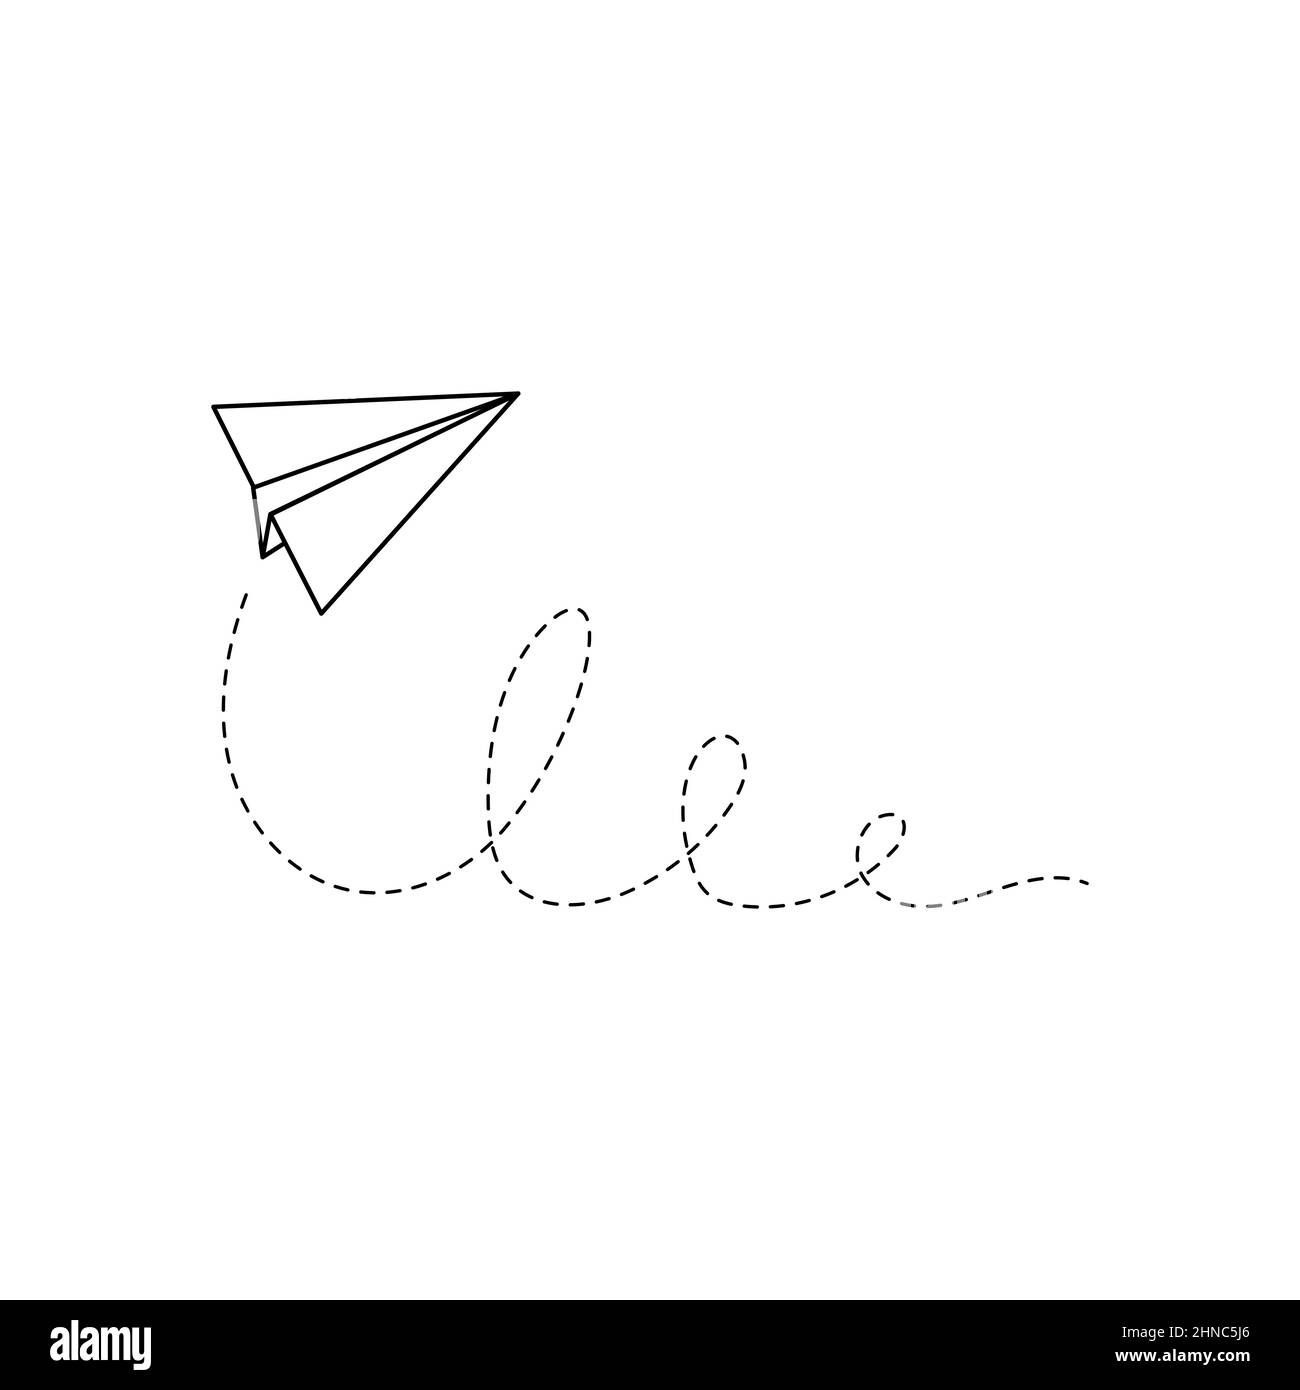 Airplane - Airplane Drawing - CleanPNG / KissPNG